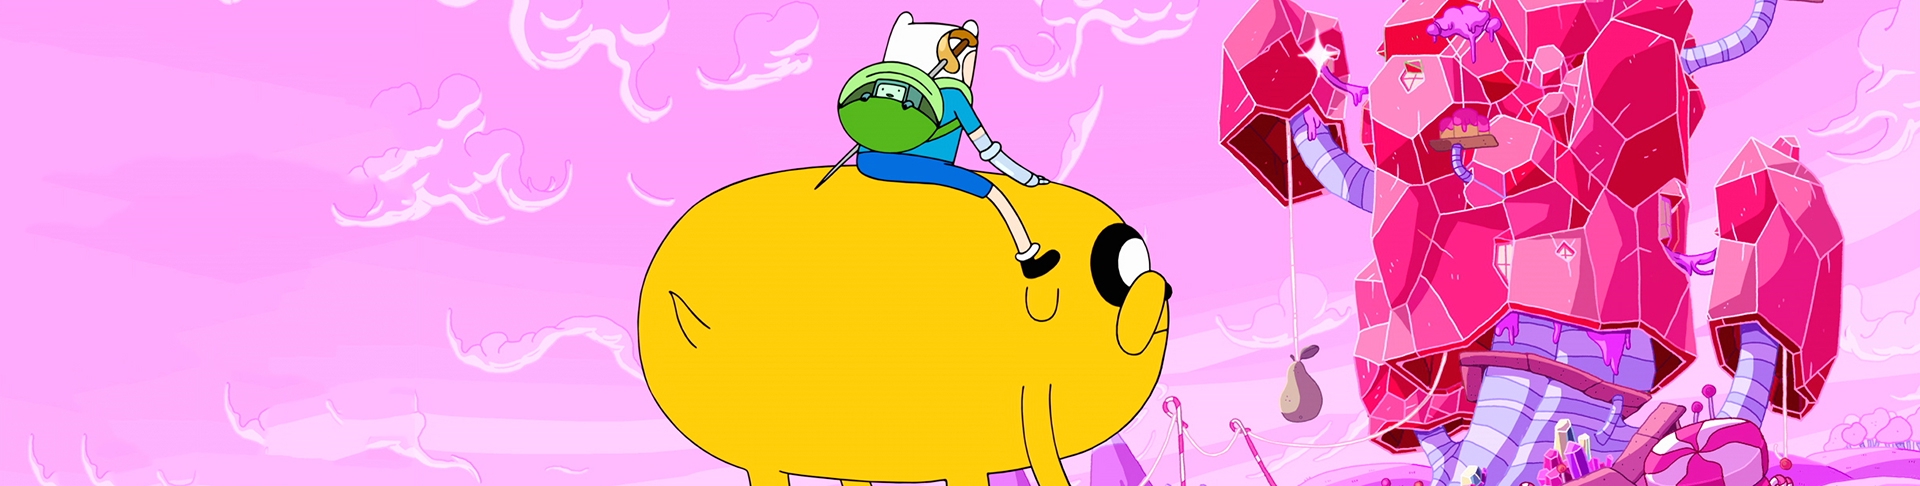 Adventure Time - Adventure Time Candy Land - HD Wallpaper 